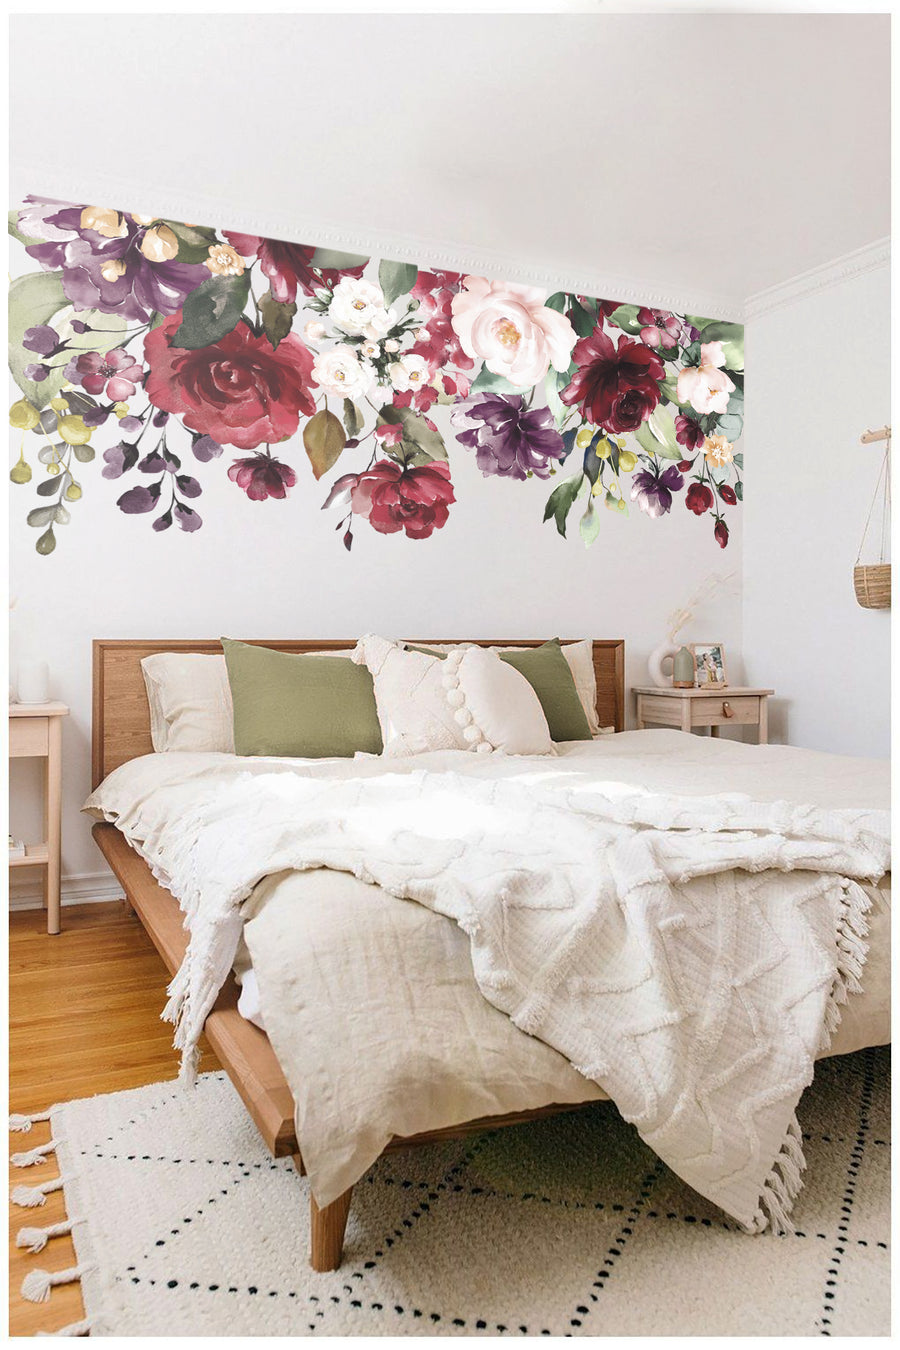 Botanical Floral Eden v.3 Wall Decal Your Decal Shop Wall Decal NZ